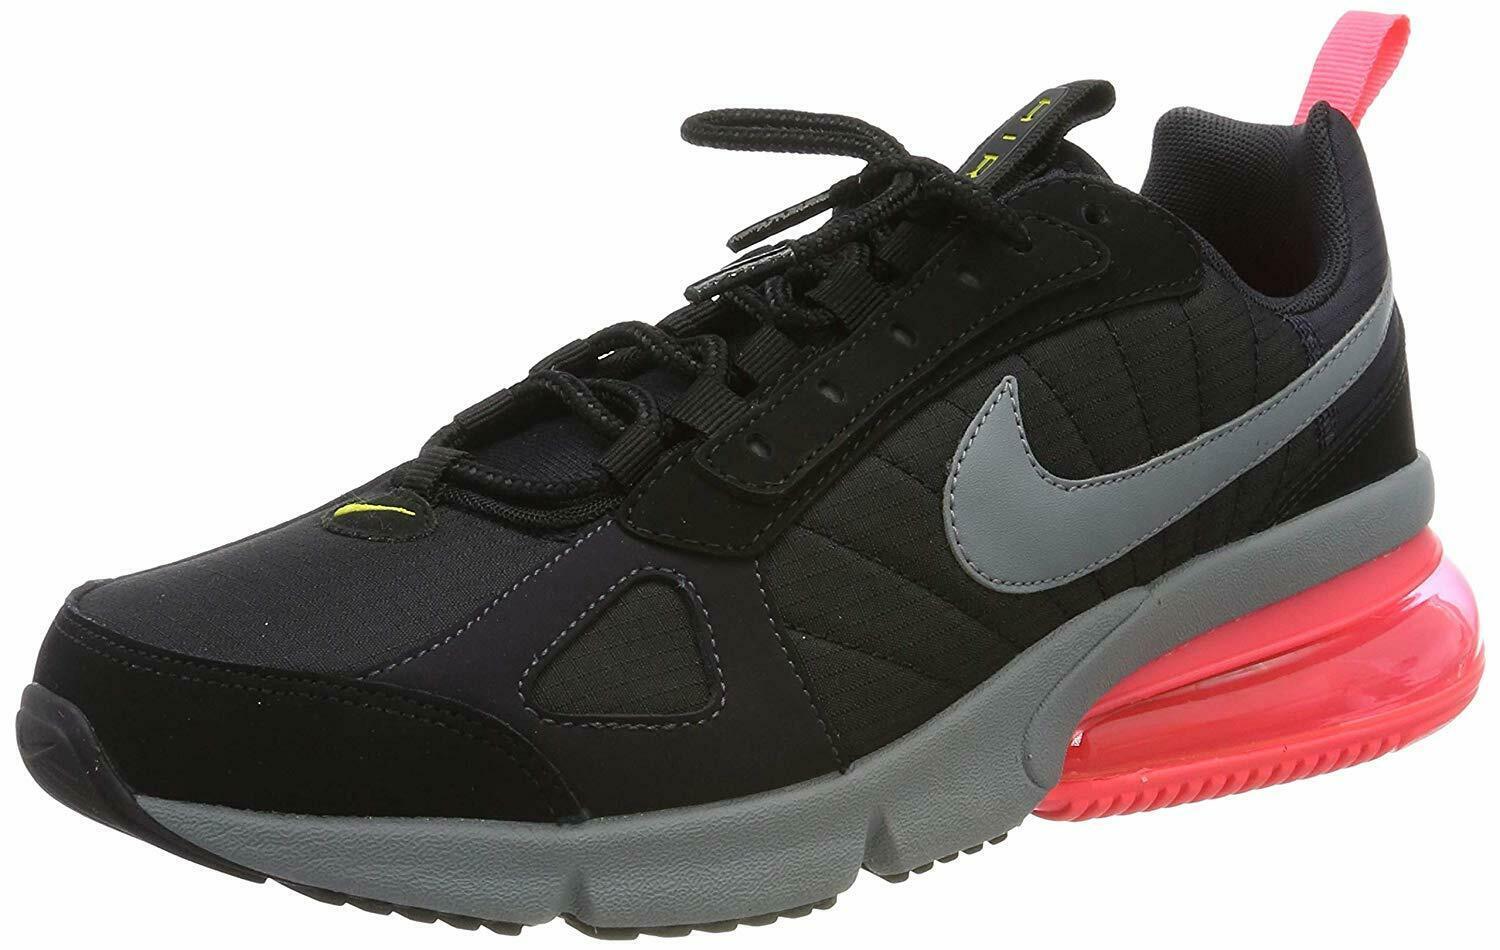 Primary image for Men's Nike Air Max 270 Futura Running Shoes, AO1569 007 Multi Sizes Black/Grey/O